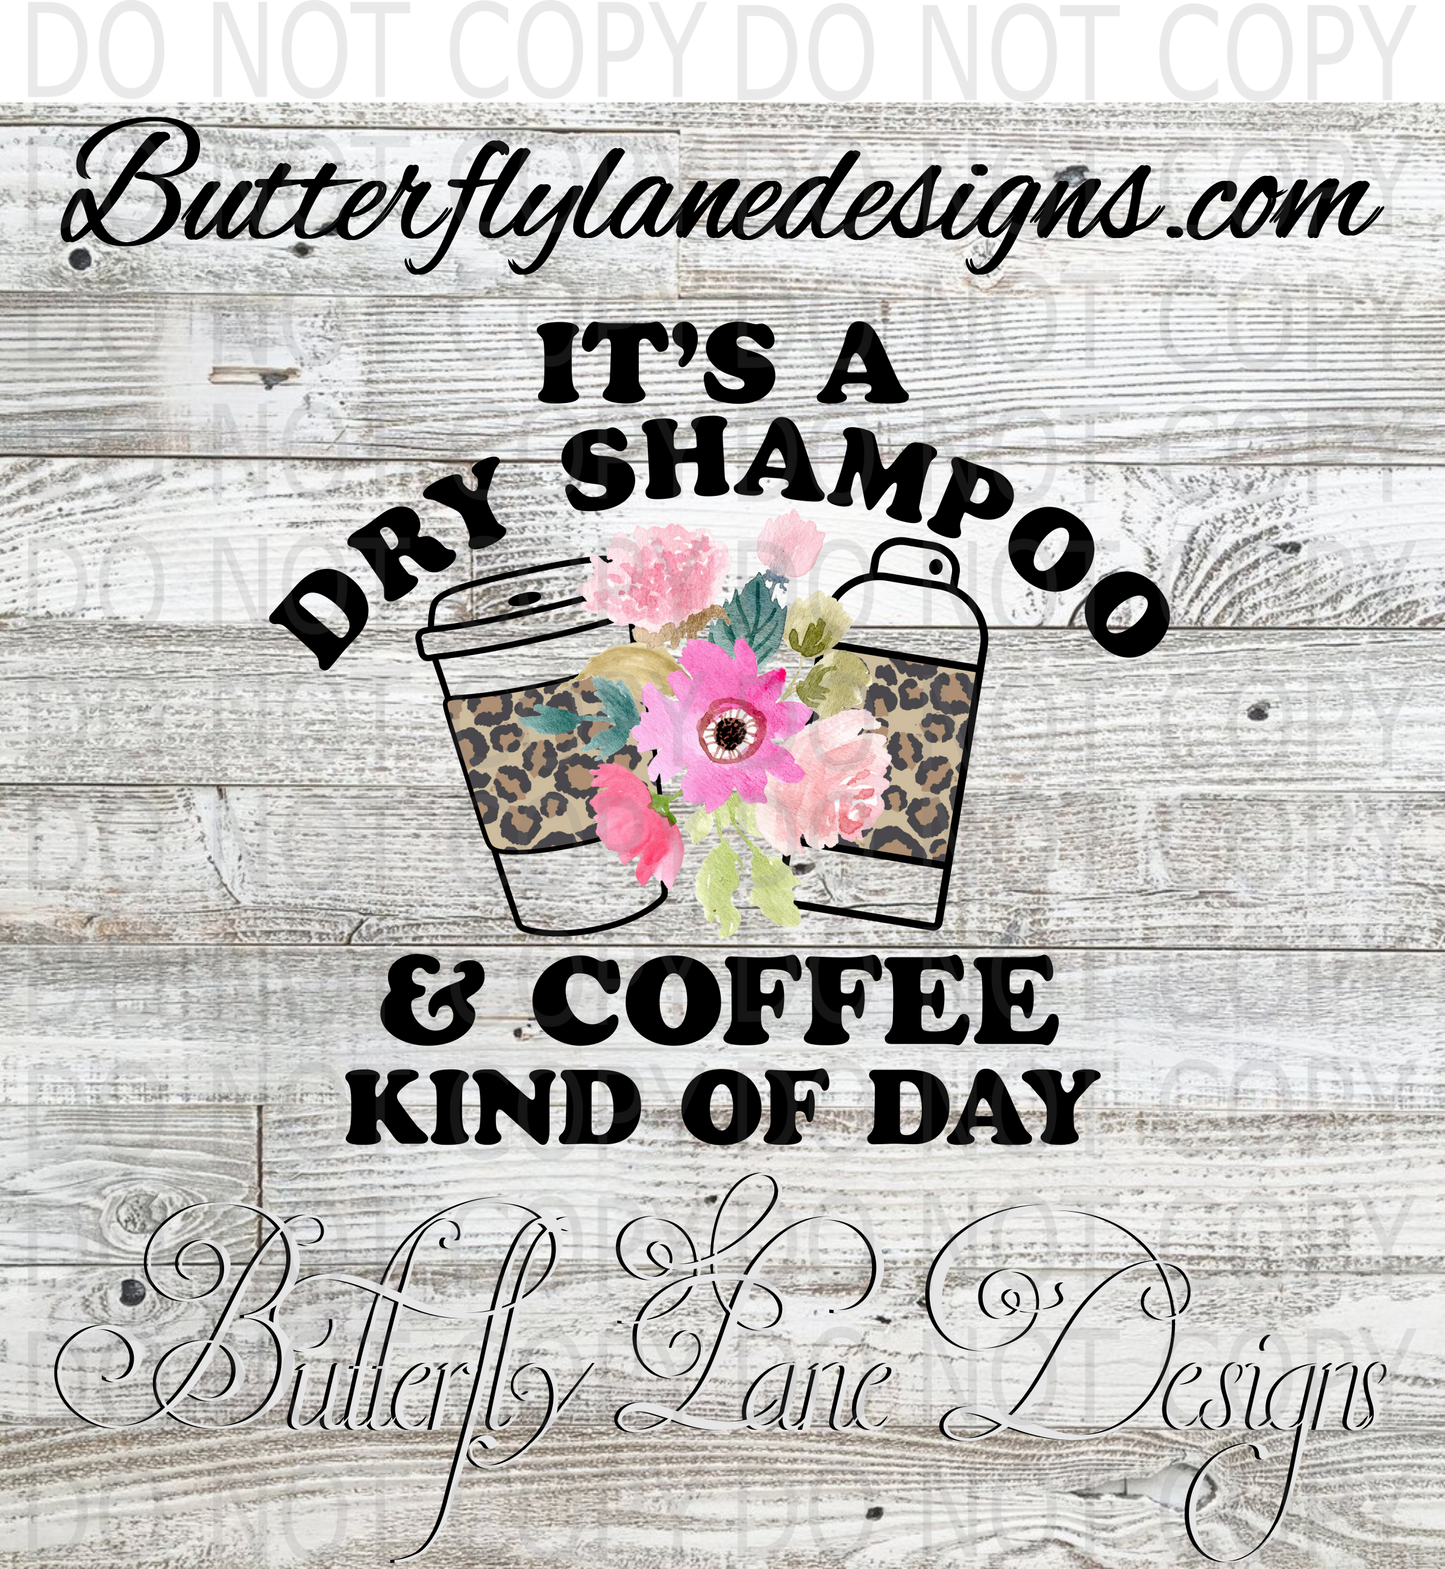 Dry shampoo and coffee kind of day :: Clear Decal :: VC Decal